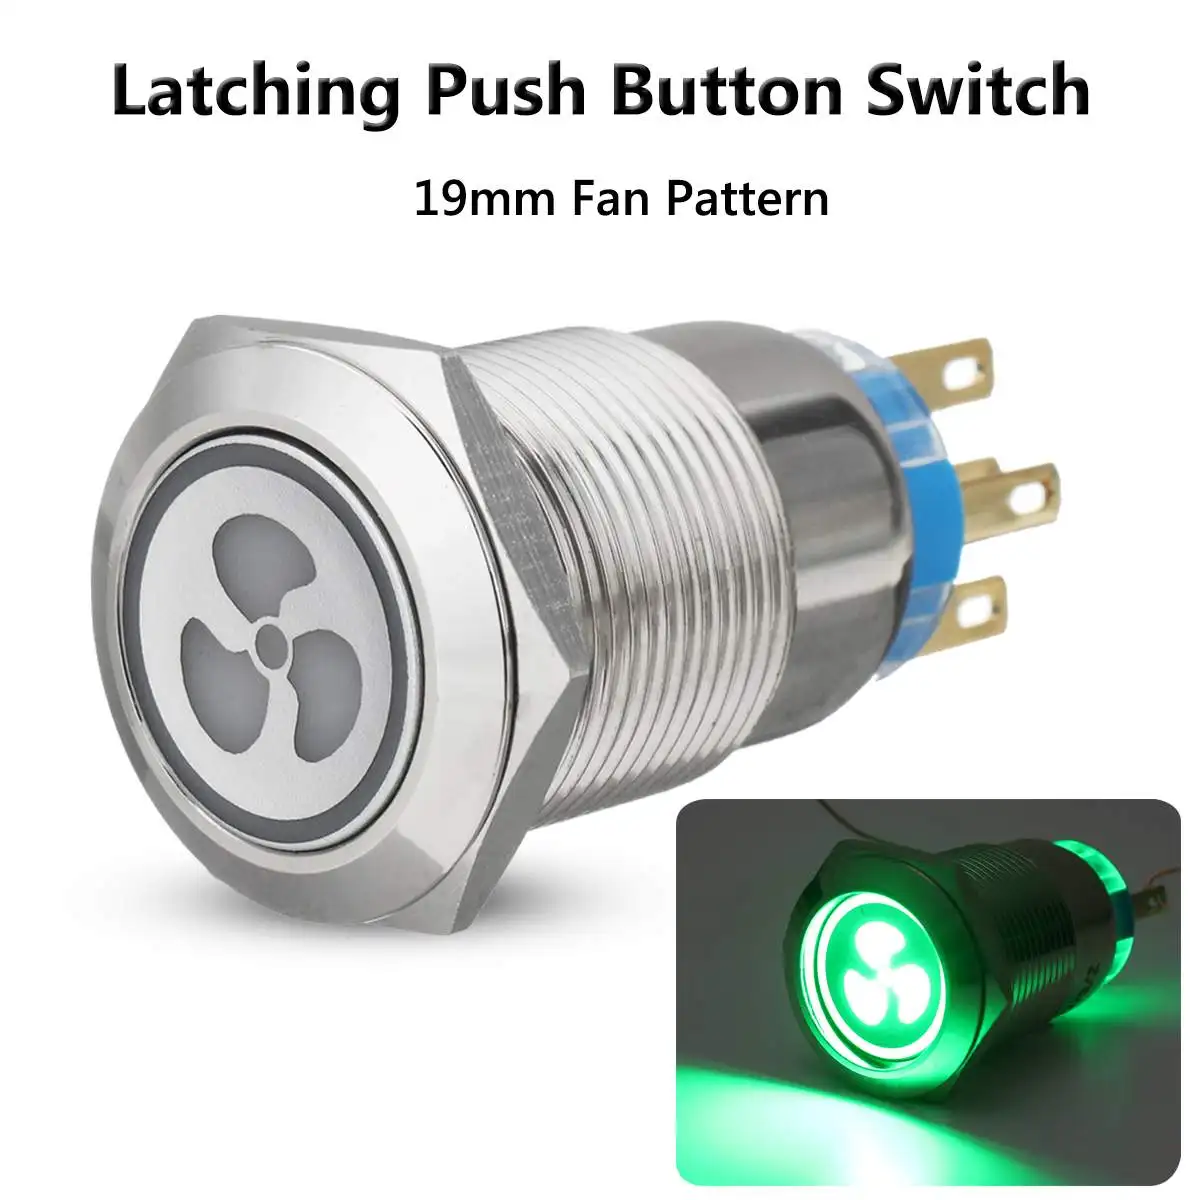 19mm LED Push Button Switch 12V Self-Lock Panel Fan Switch For Car Truck Lorry Boat - Color: Green